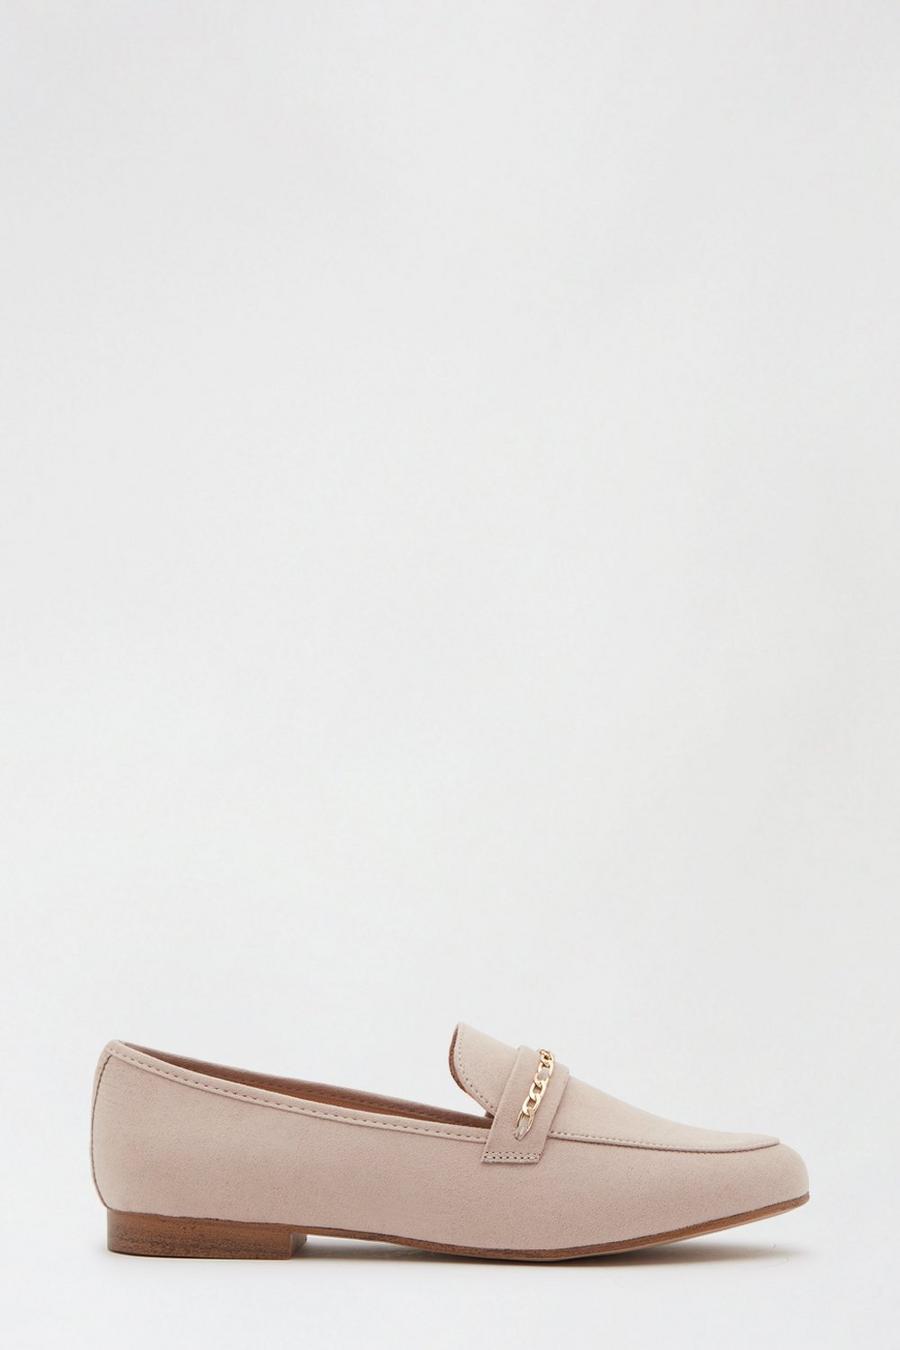 Blush 'Lecily' Chain Trim Loafer